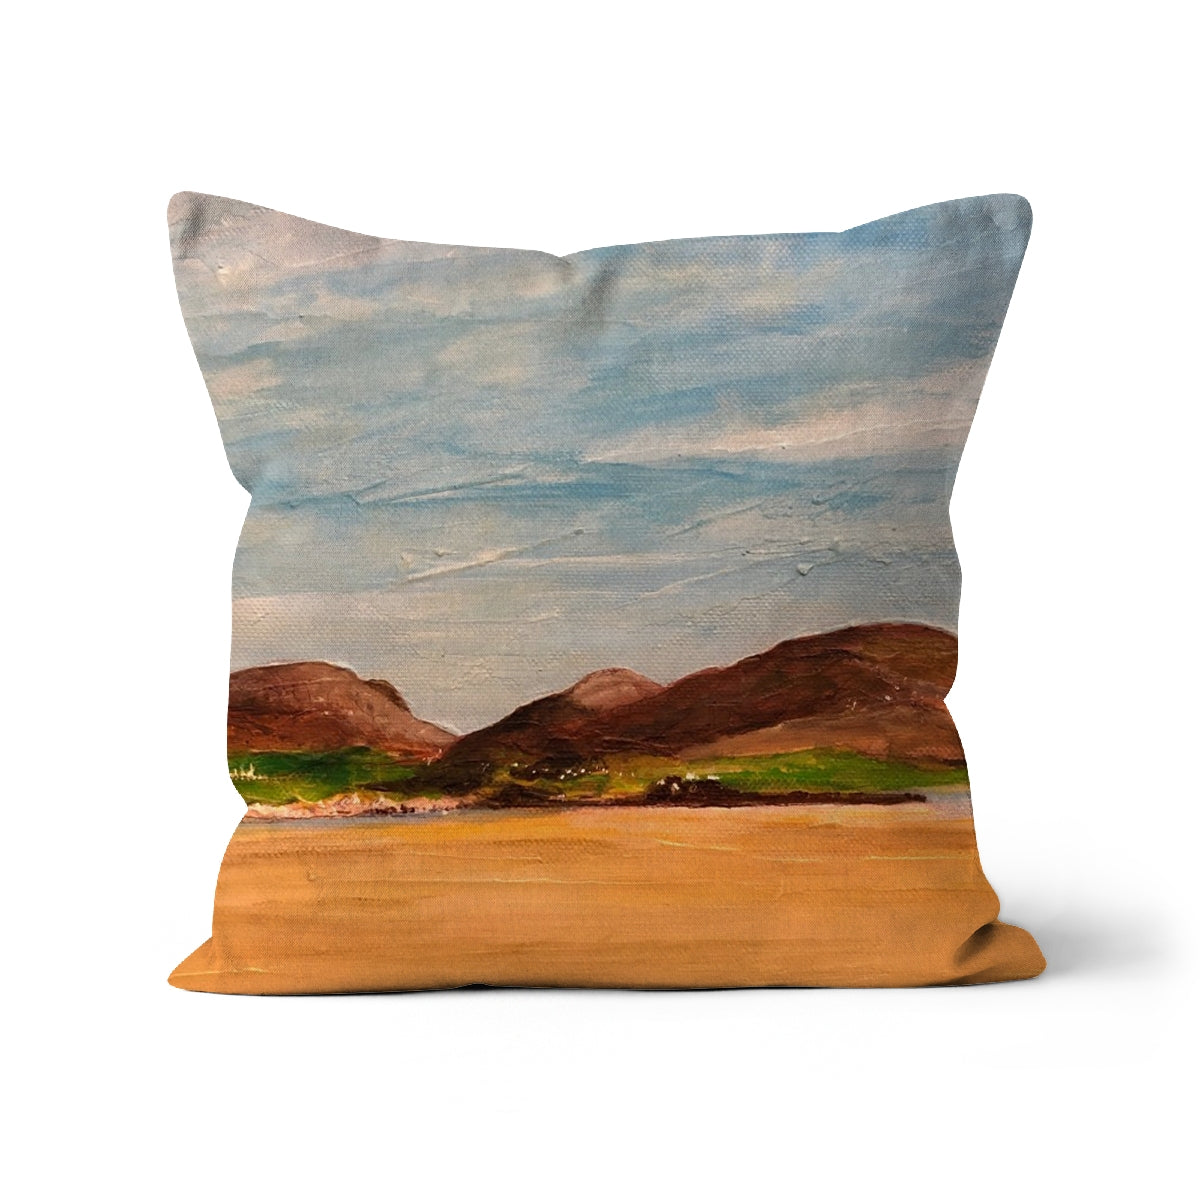 Uig Sands Lewis Art Gifts Cushion-Cushions-Hebridean Islands Art Gallery-Canvas-12"x12"-Paintings, Prints, Homeware, Art Gifts From Scotland By Scottish Artist Kevin Hunter